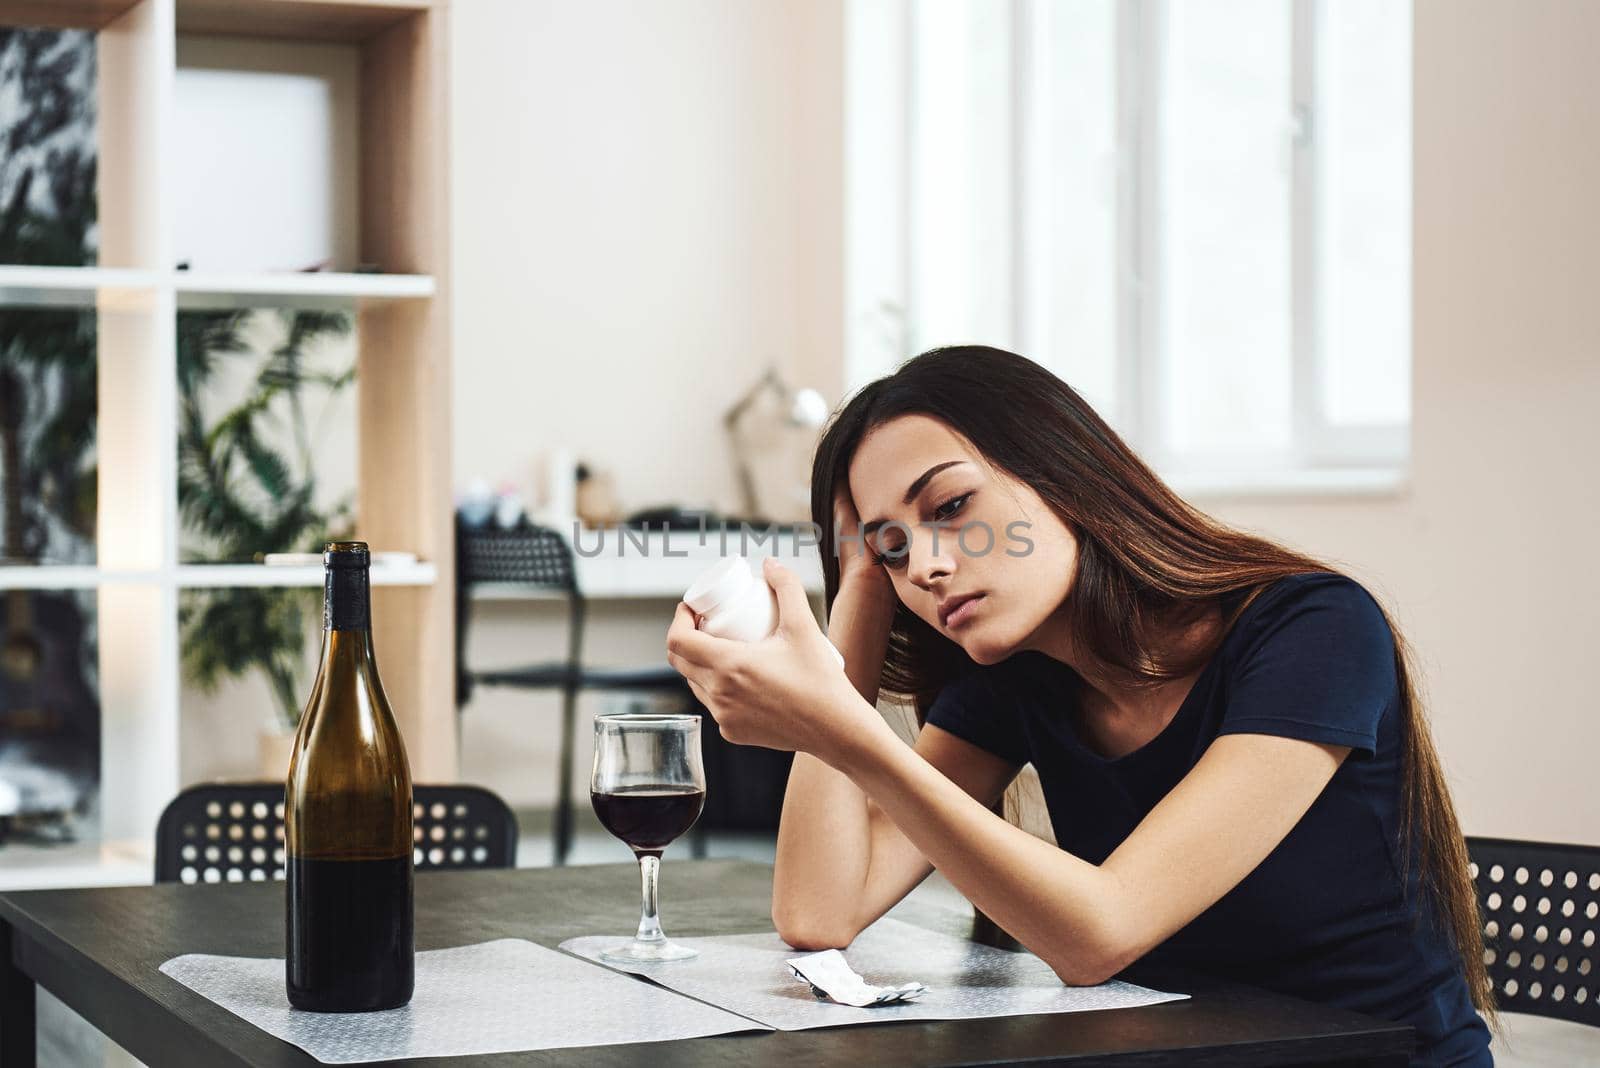 Young dark-haired woman is going to drink a glass of red wine and take pills alone in kitchen at home. Female alcoholism concept. Protest in the treatment of alcohol addiction.